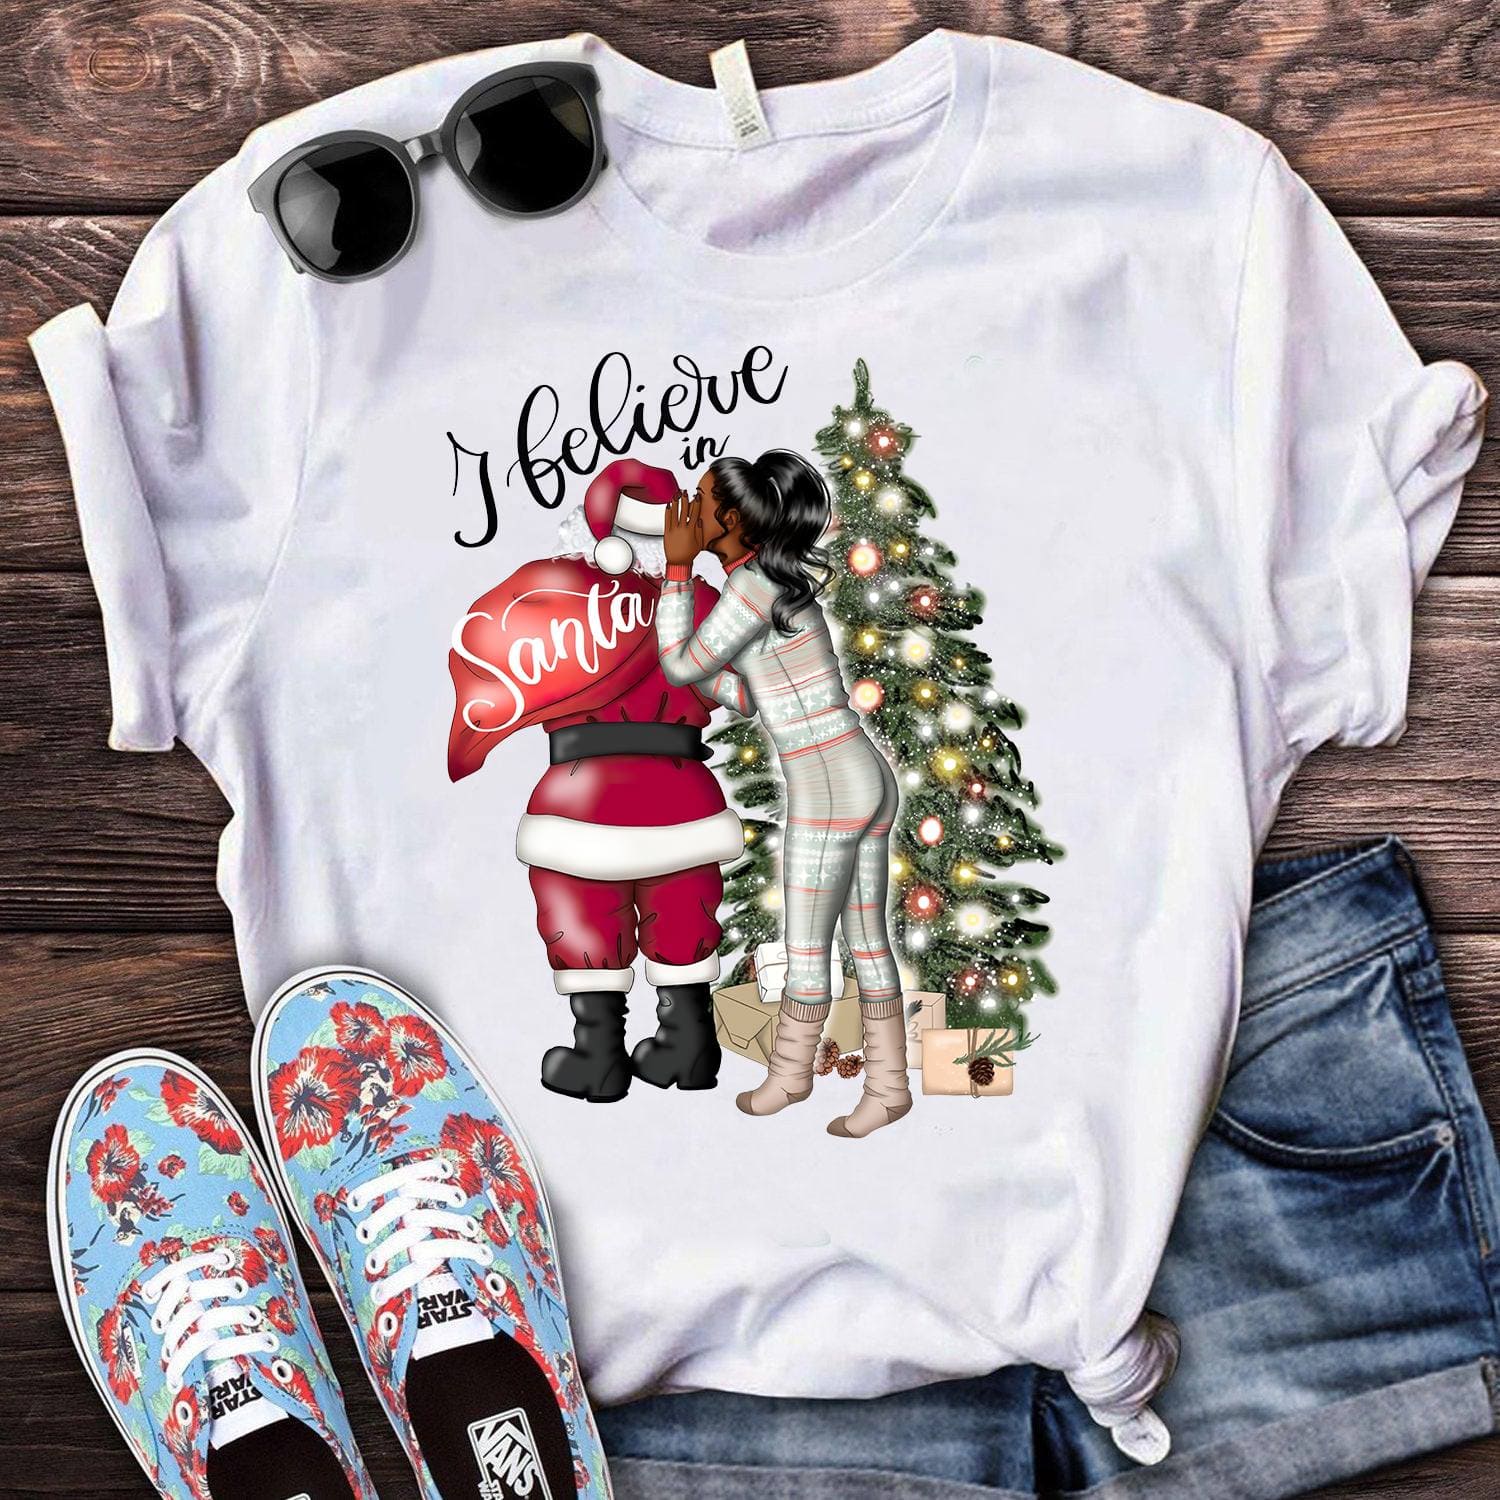 Santa Claus Ugly Christmas Sweater Girl - I believe in Santa